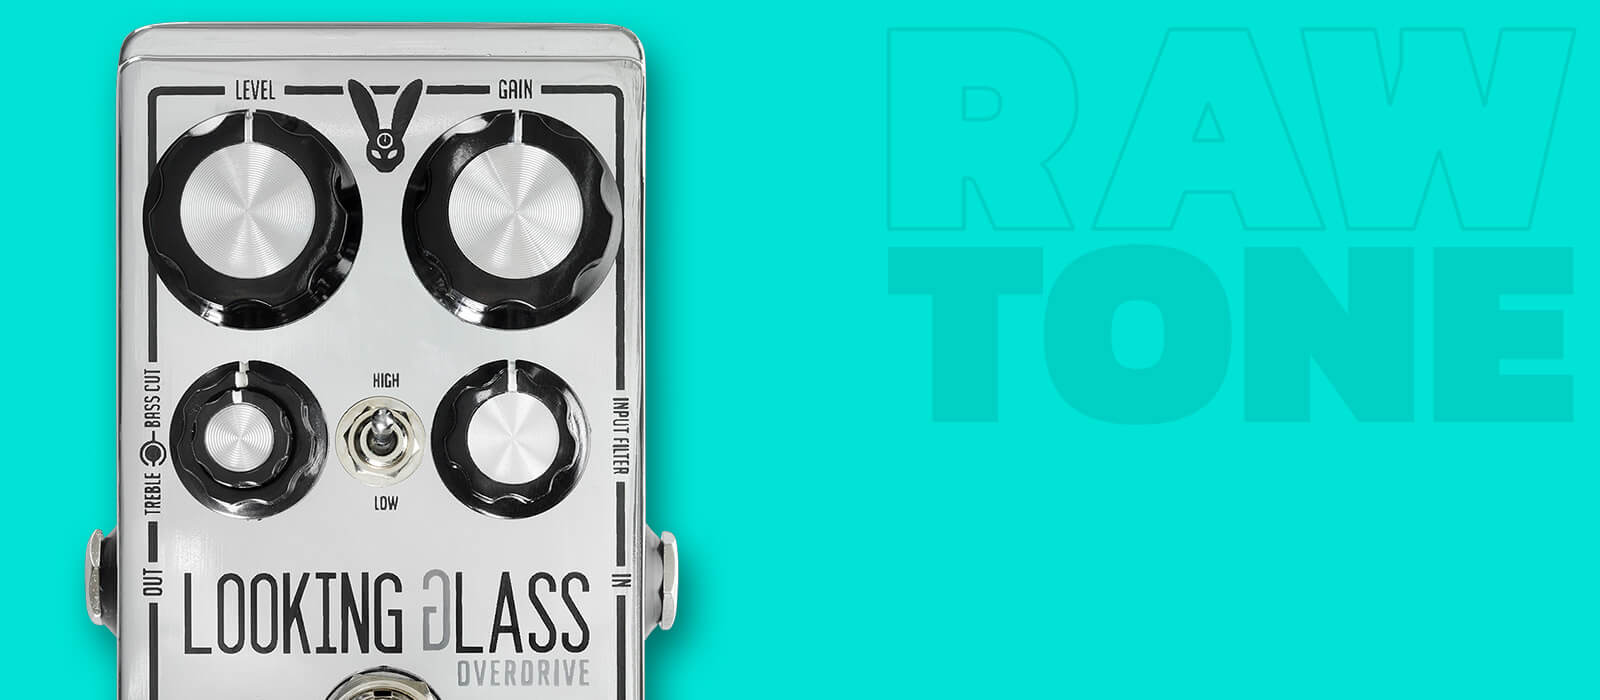 DOD Looking Glass class-a FET overdrive guitar pedal in silver with teal background that says 